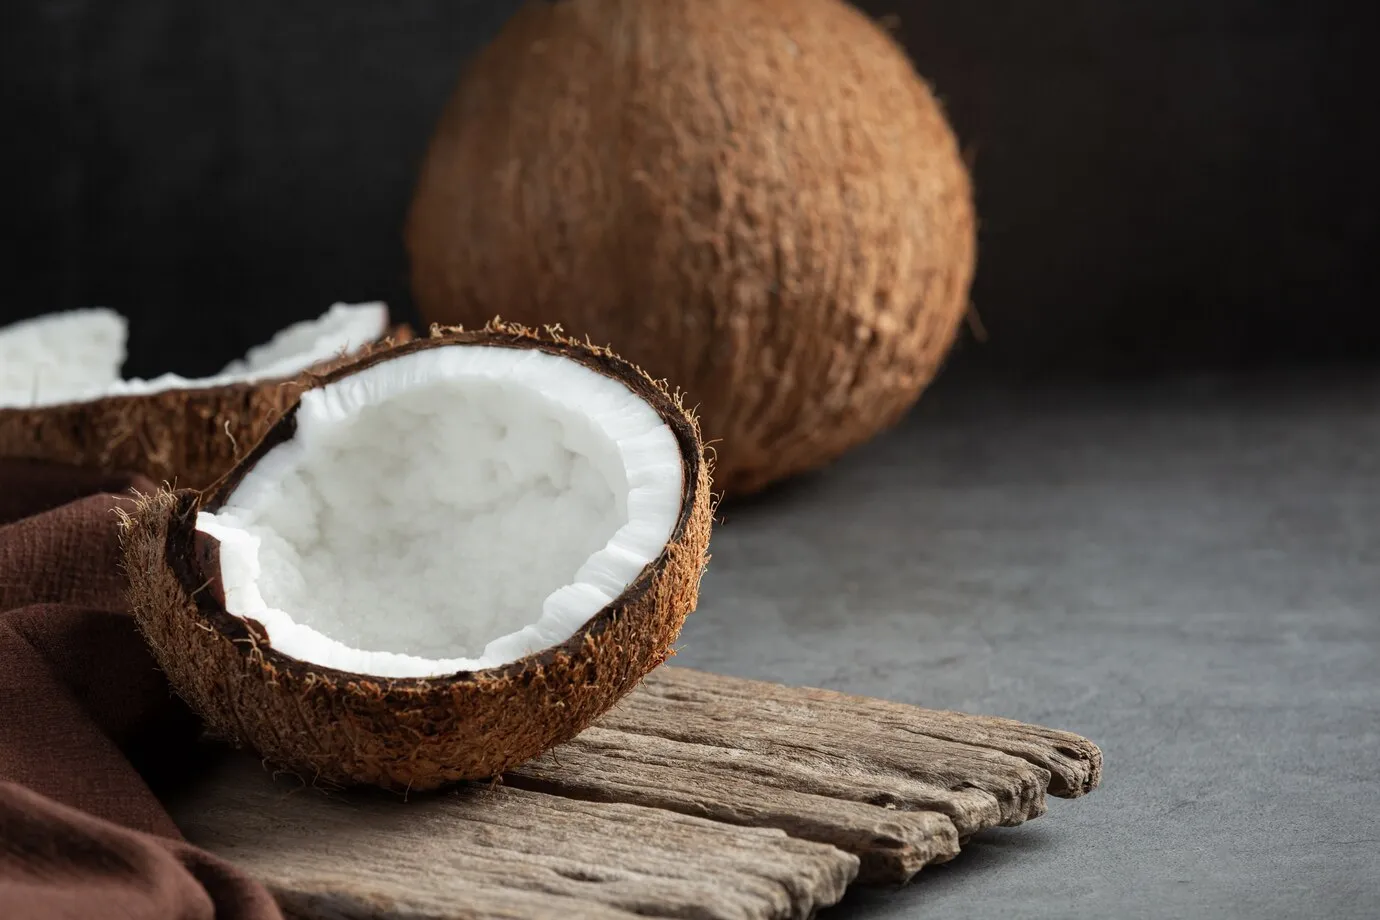 Coconut on wooden cutting board, versatile fruit used in cooking, baking, and skincare.